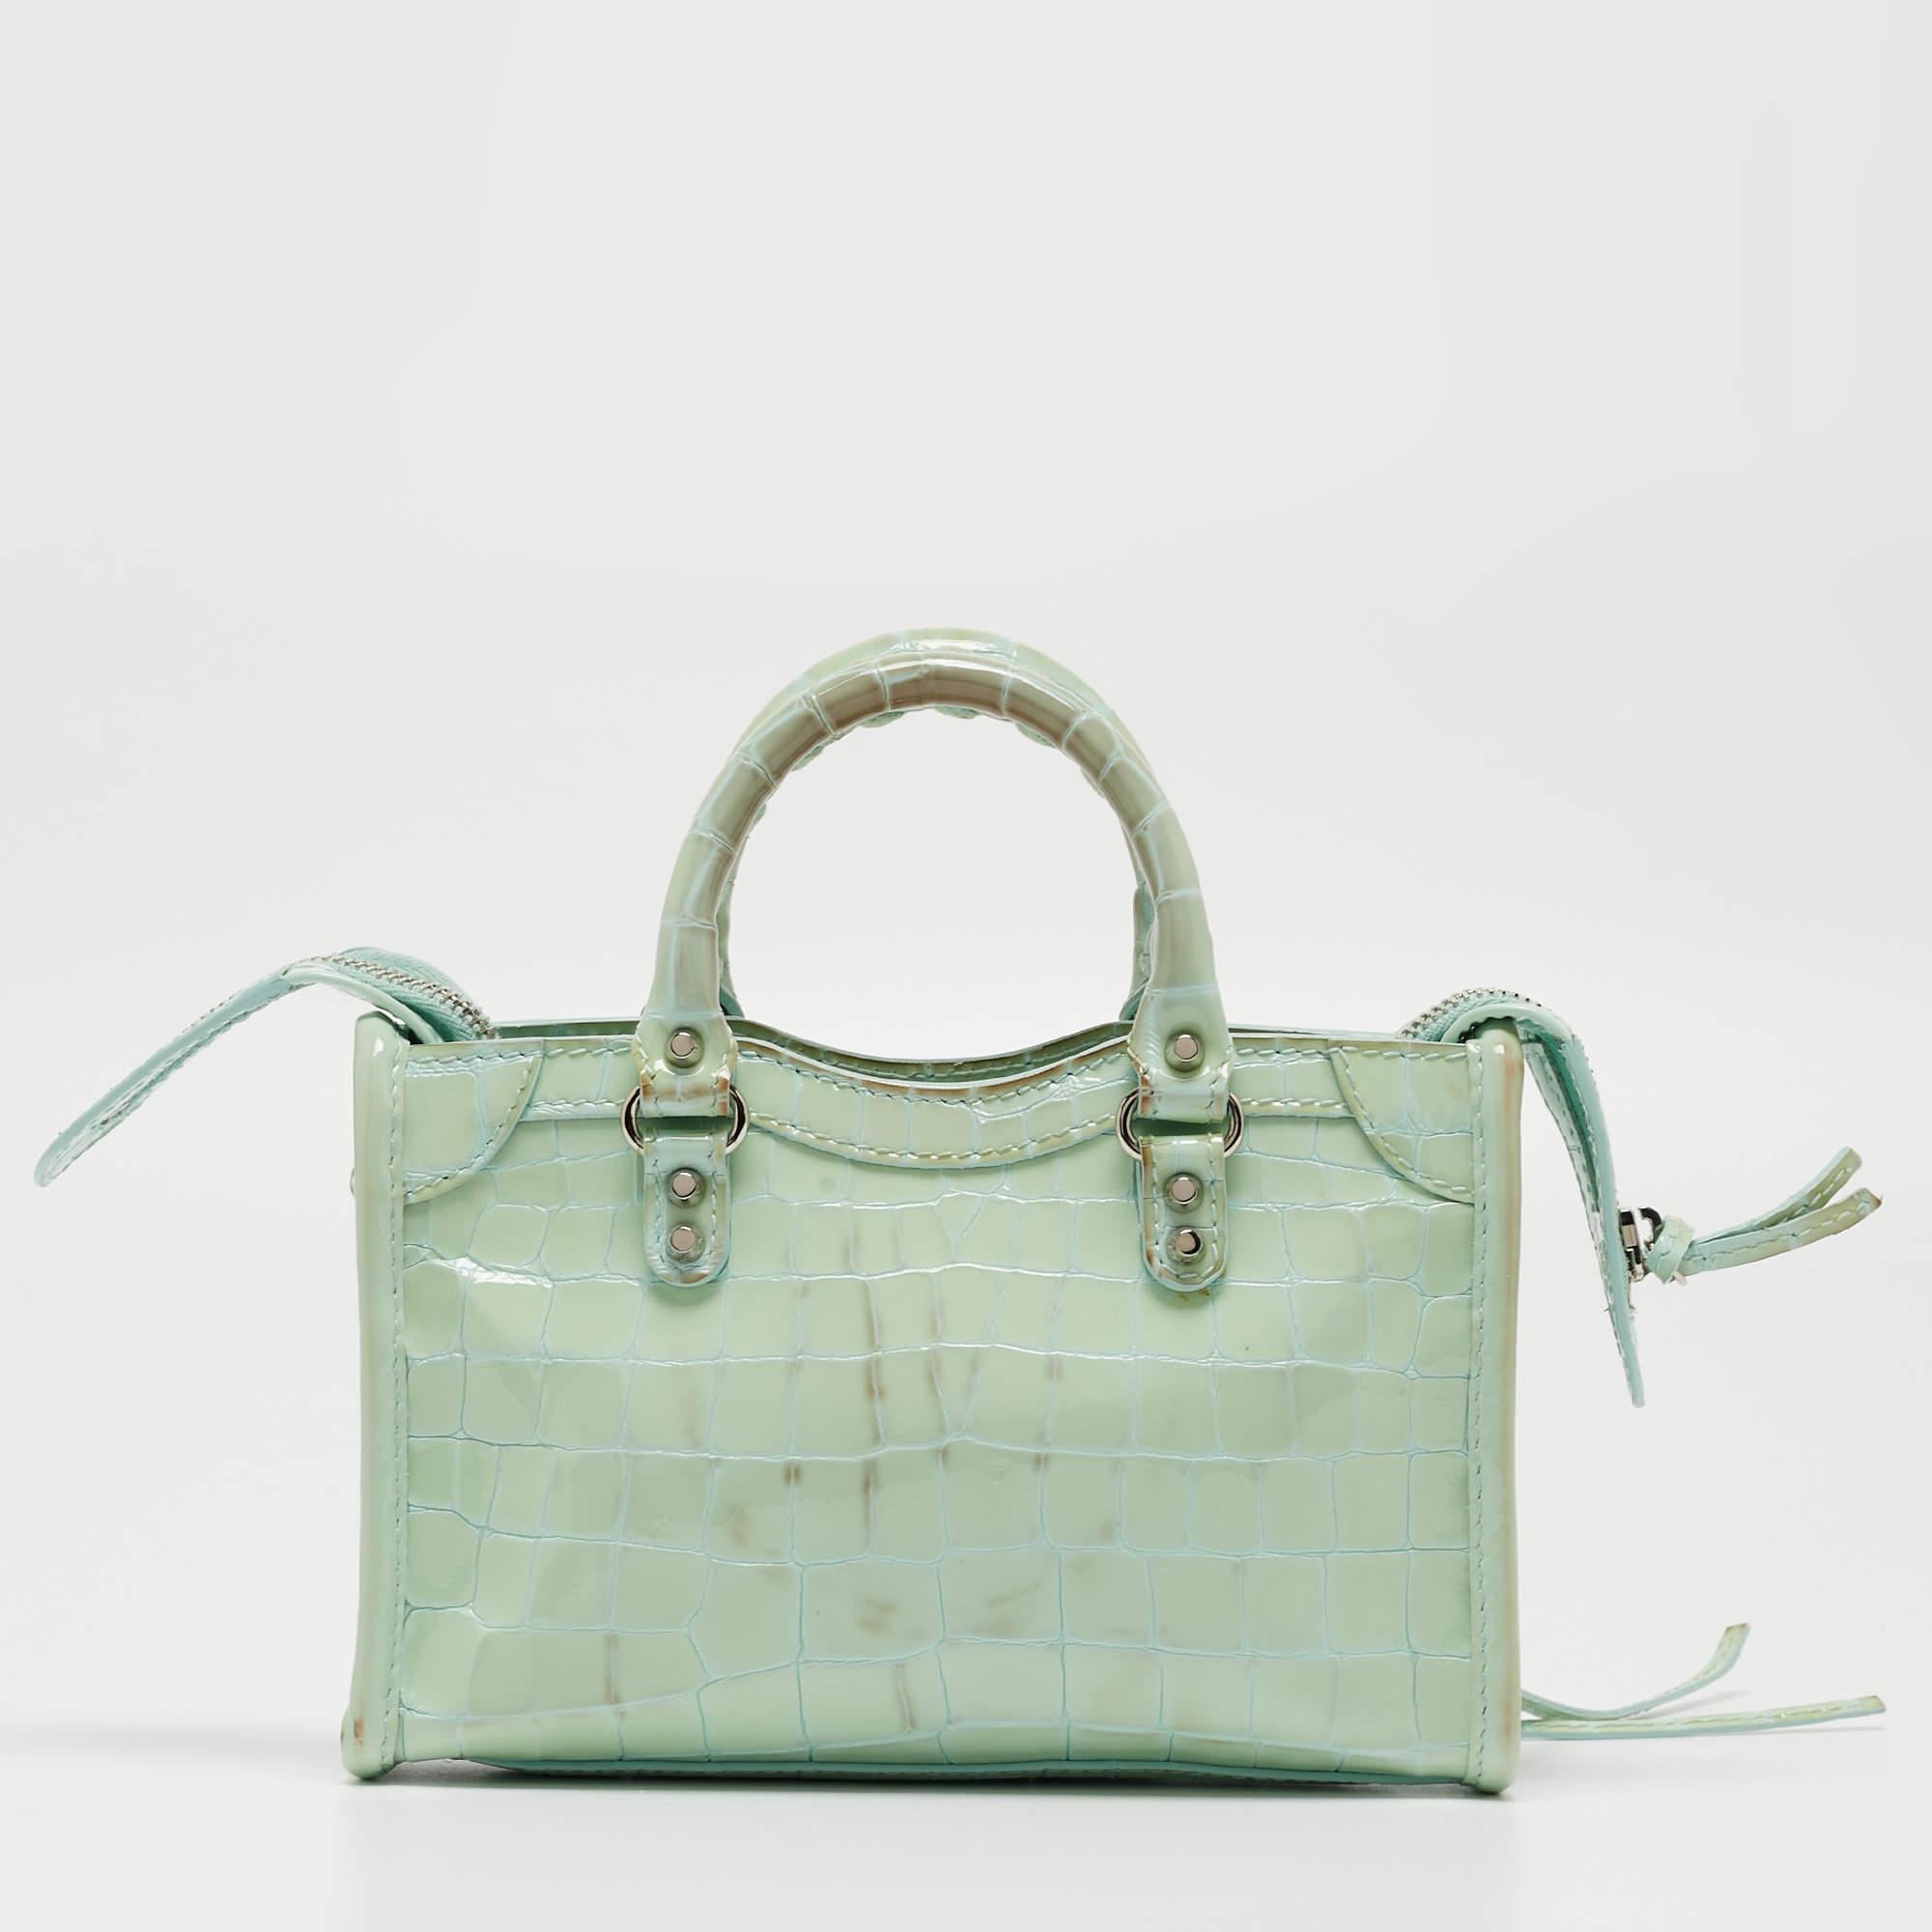 The Balenciaga Nano Classic City Tote exudes luxury with its vibrant mint green hue and textured croc-embossed pattern. Crafted from high-quality patent leather, this compact tote features the iconic City silhouette, making it a stylish and